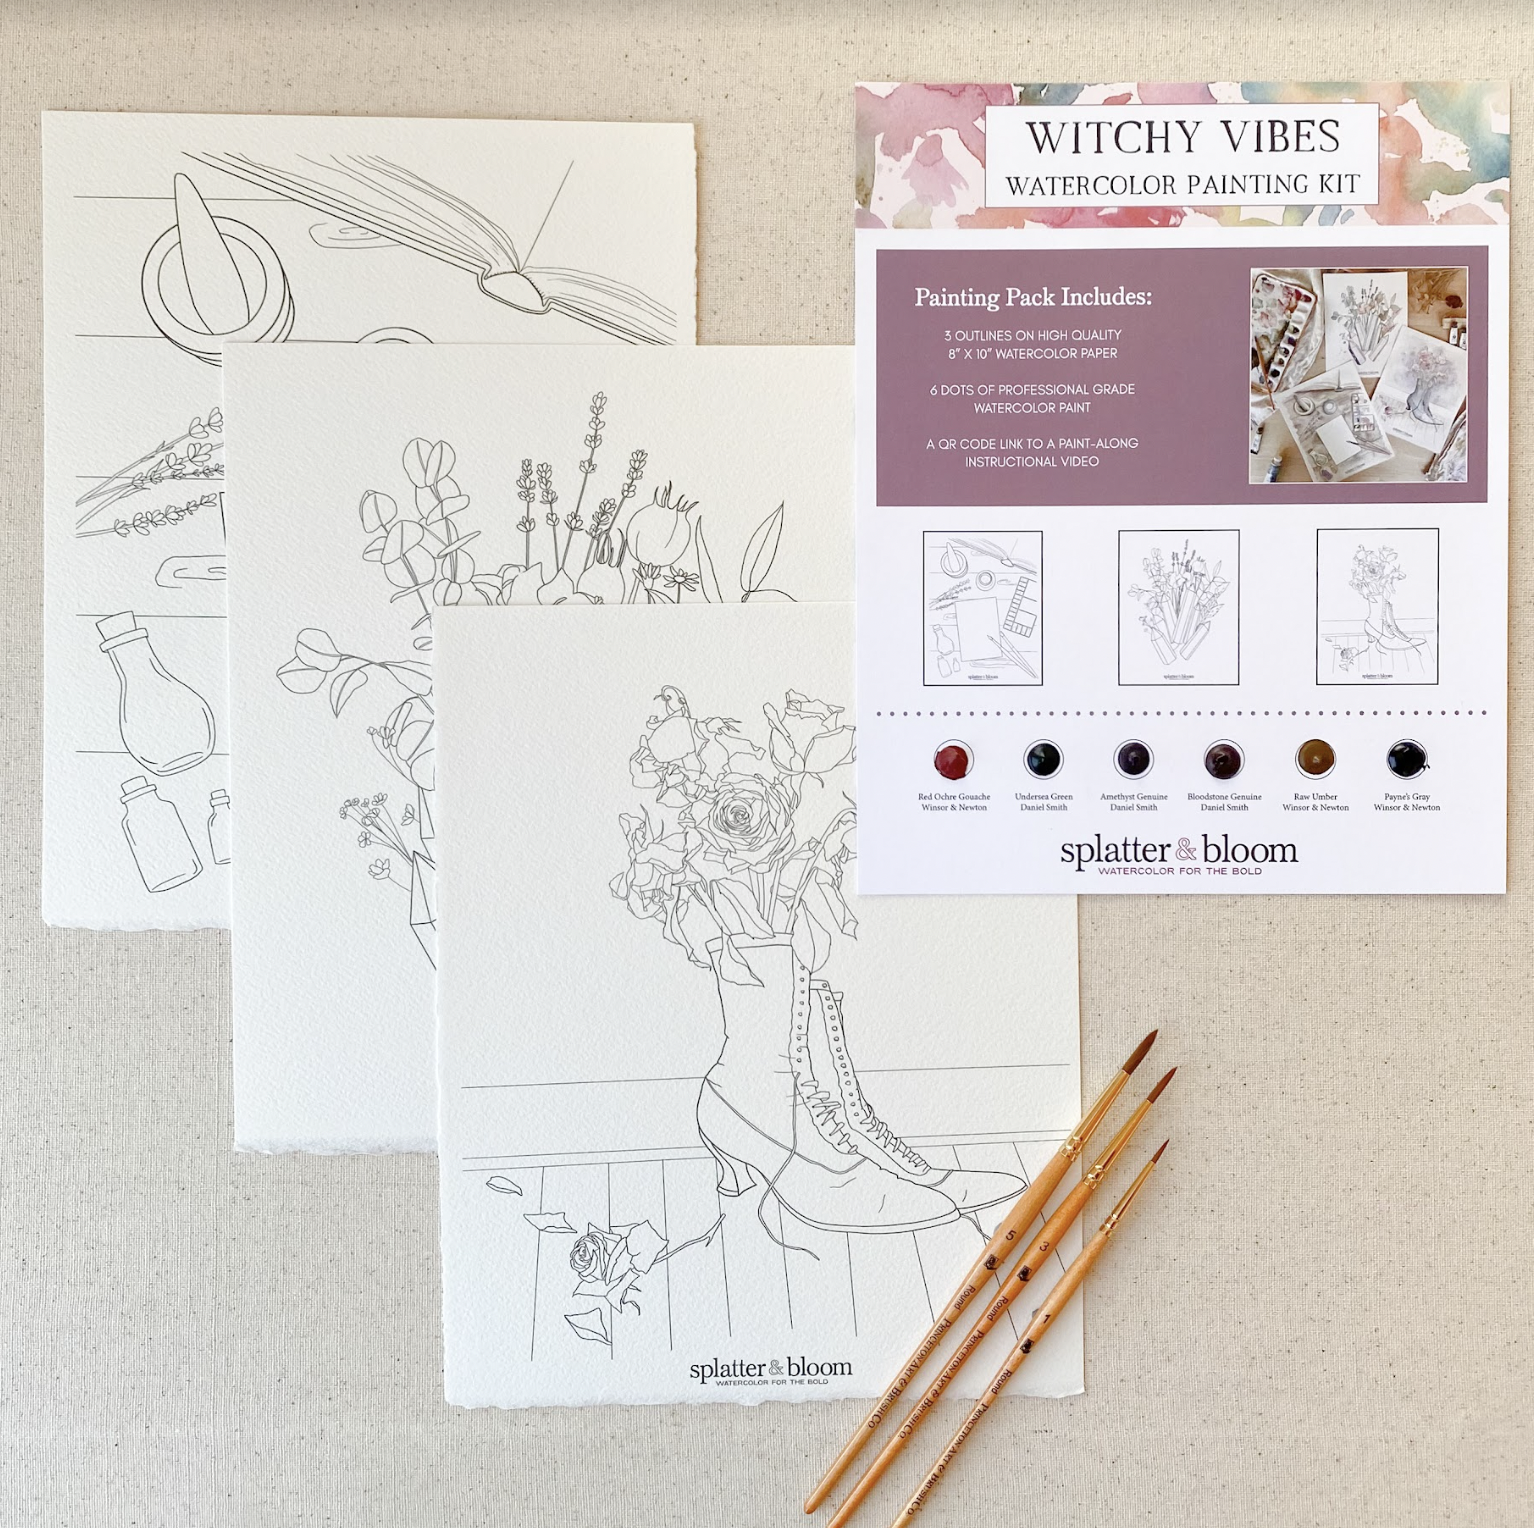 Three images printed on watercolor paper are ready to be painted. One is a witches boot with flowers growing out of it. The set is called Witchy Vibes. 